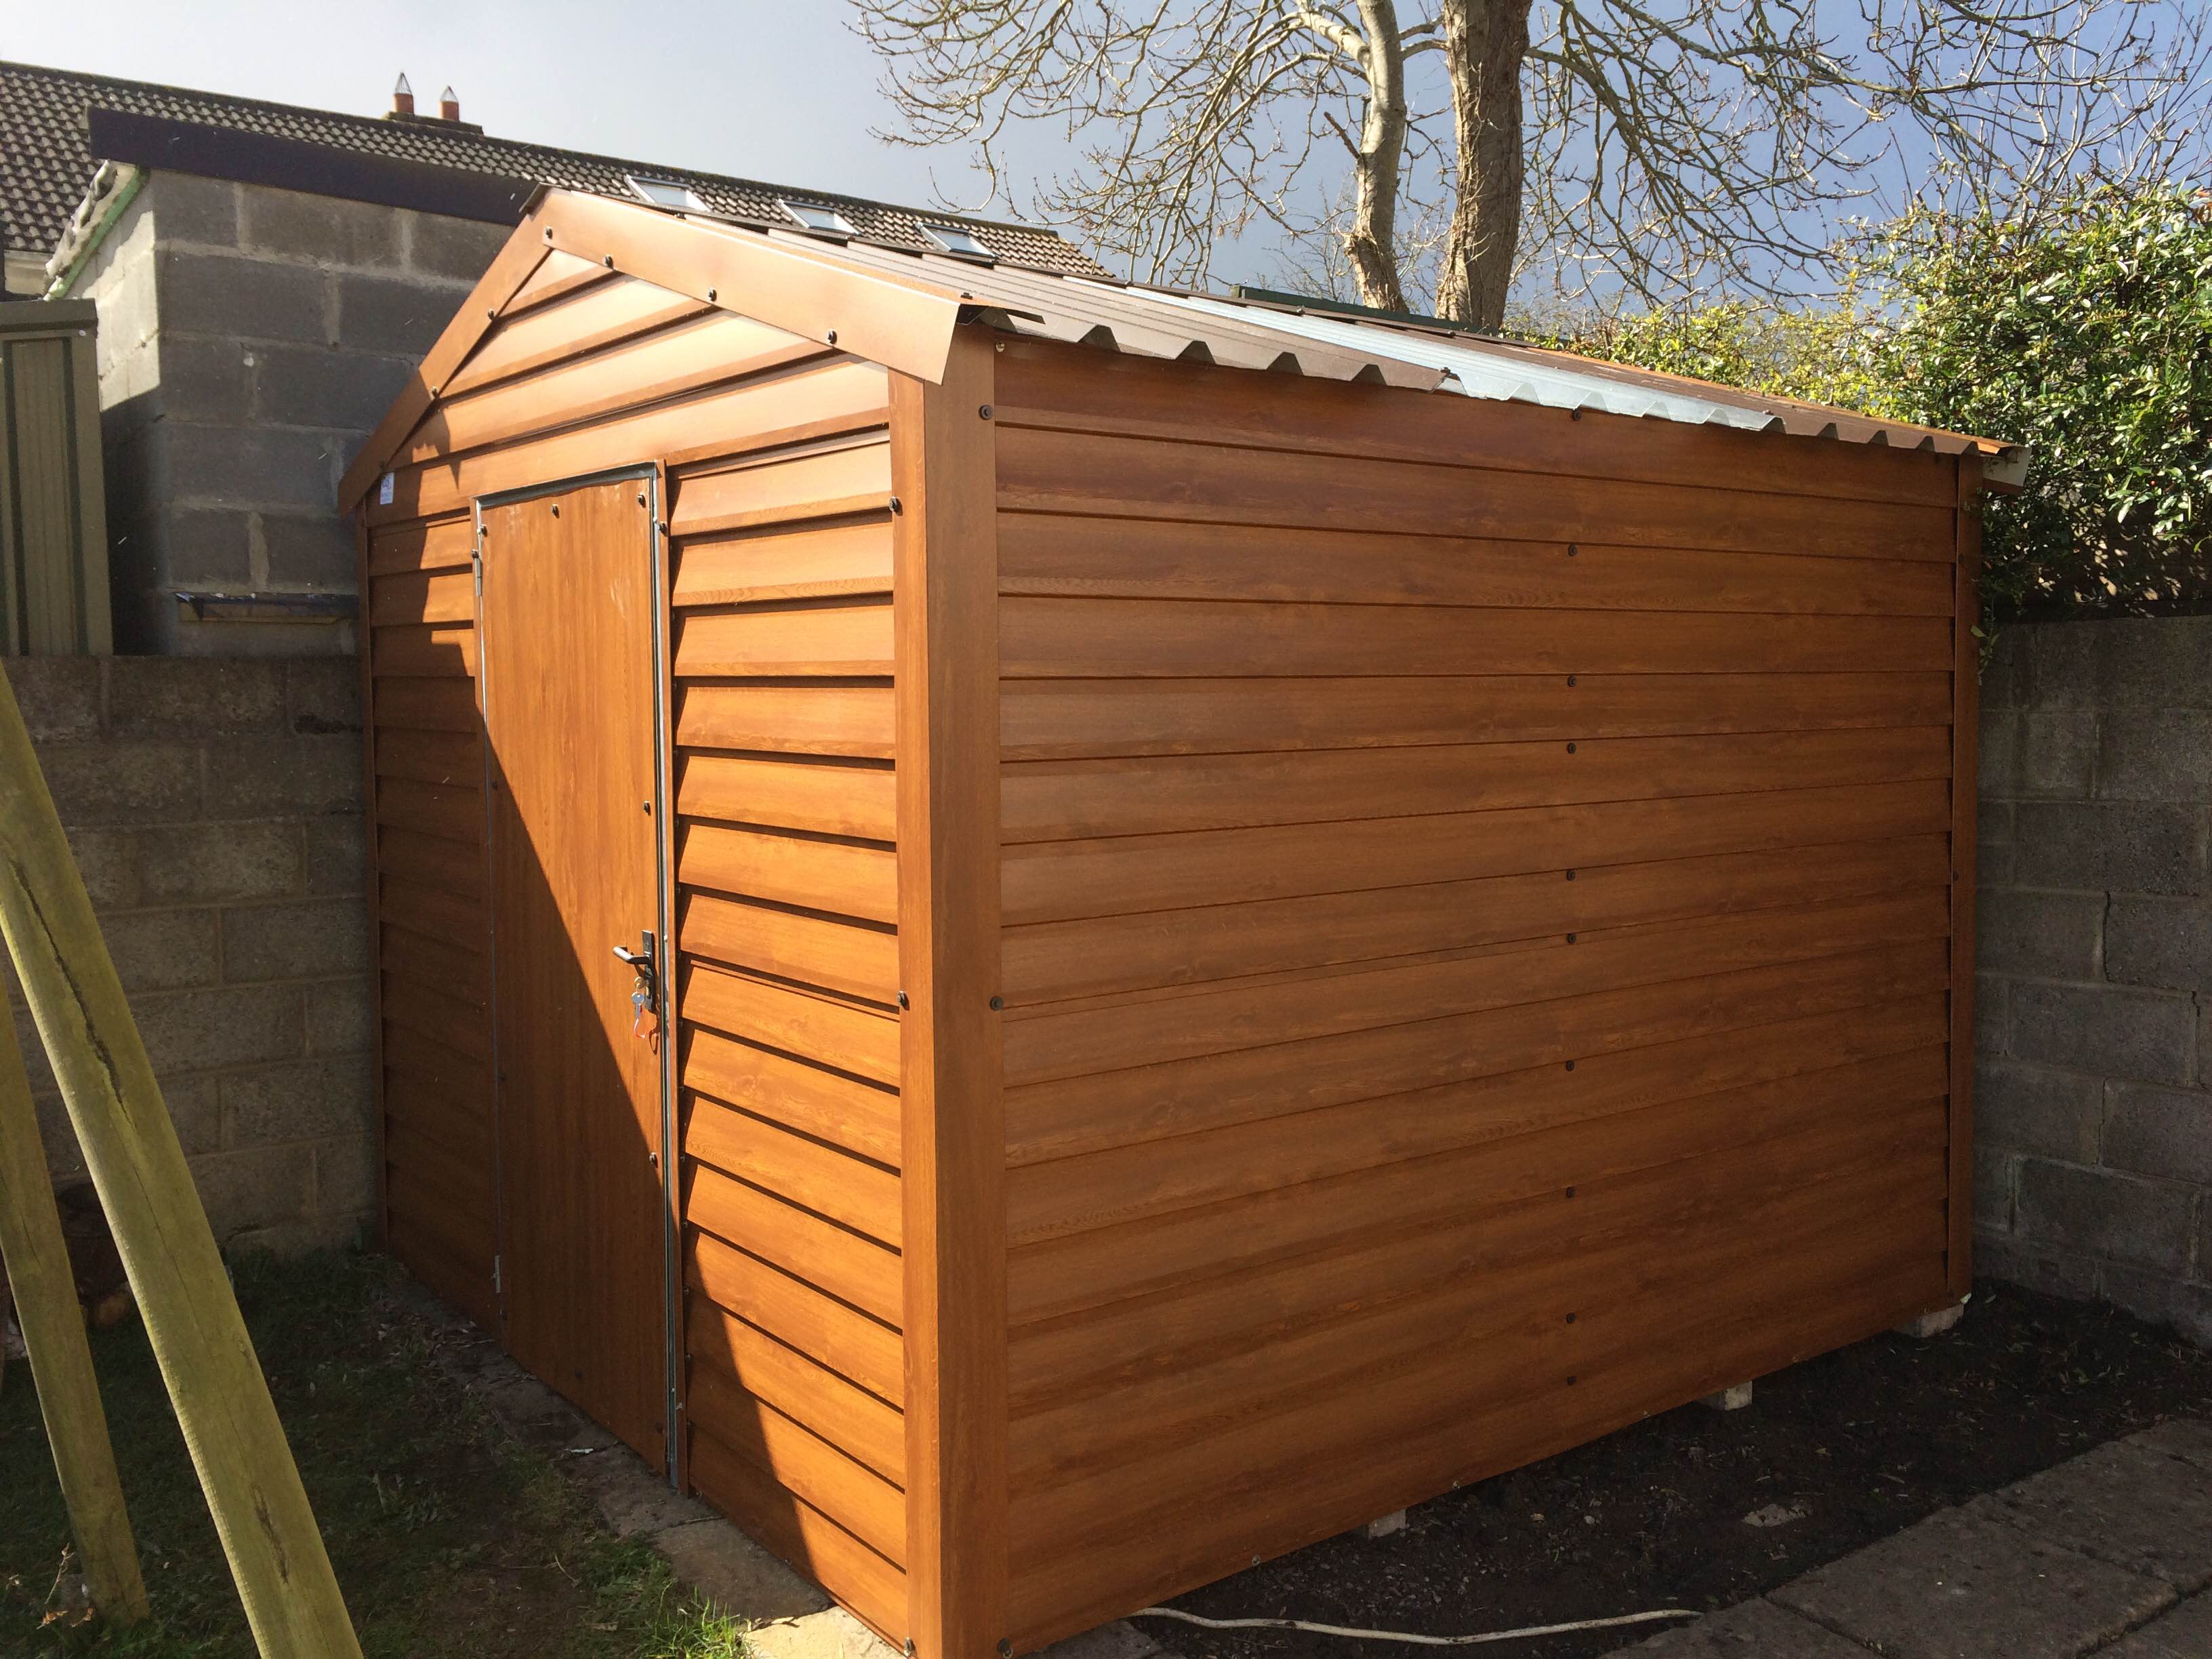 shed cladding timber cladding wooden shed cladding